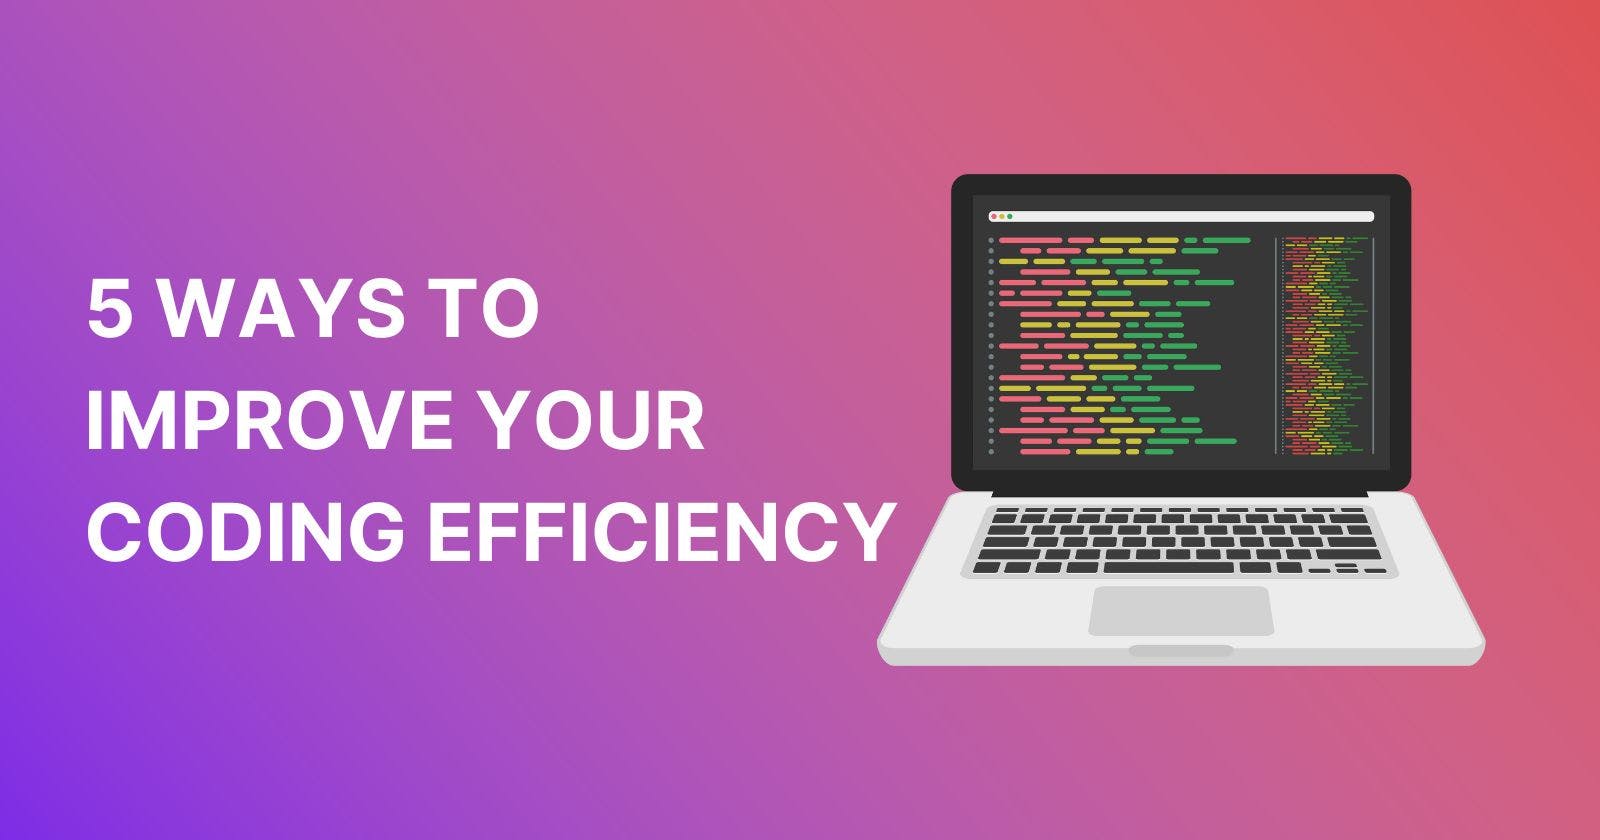 5 Ways to Improve Your Coding Efficiency